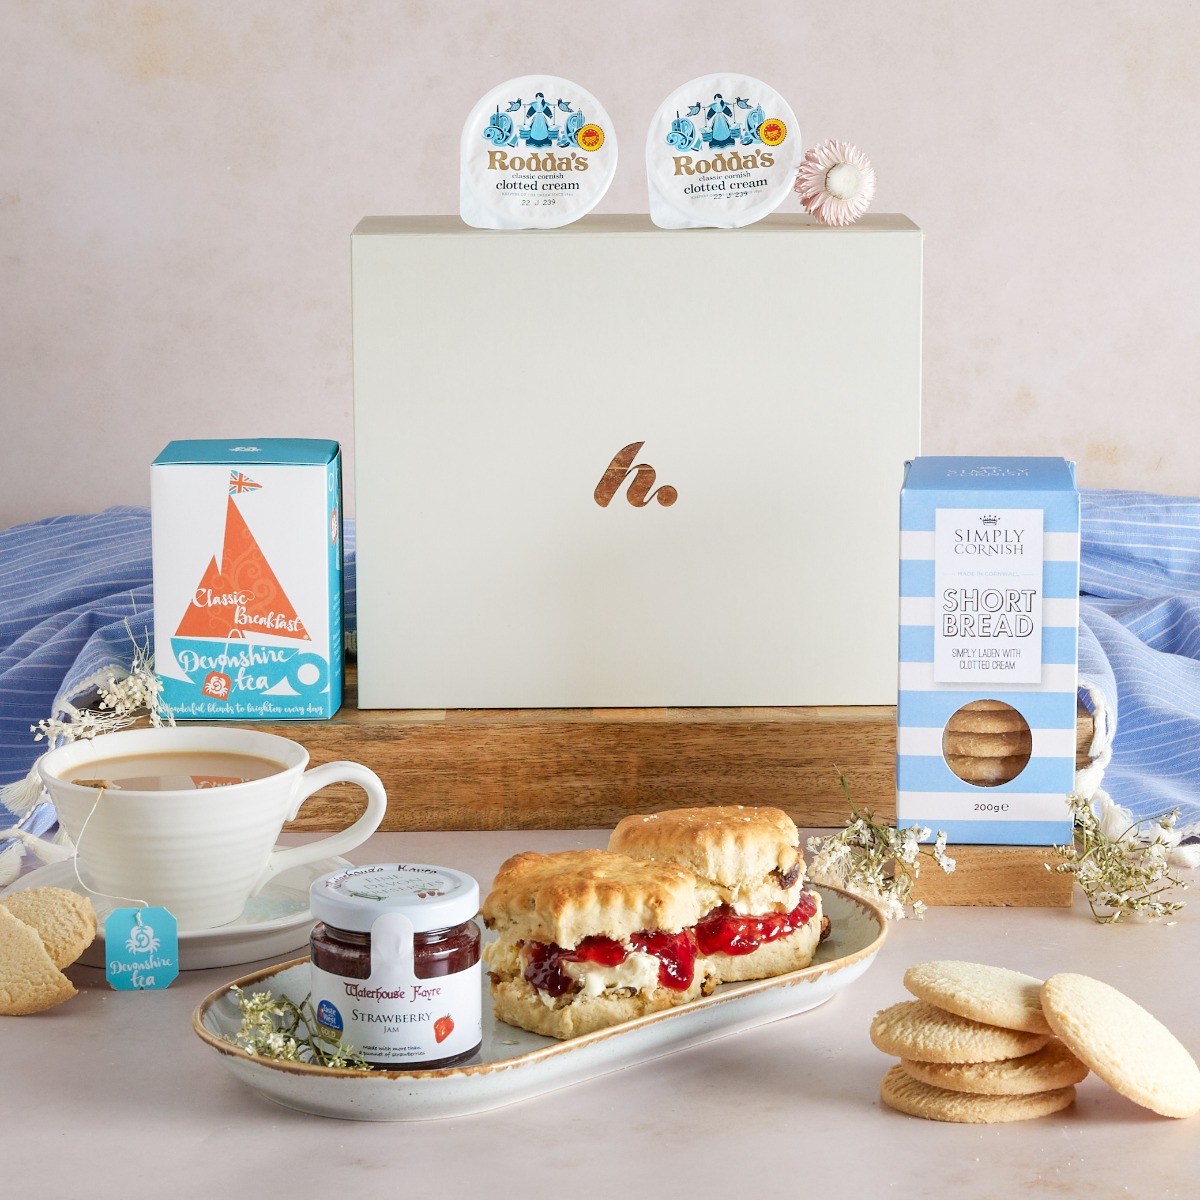 Afternoon Cream Tea For One Afternoon Tea Hampers Hampers.com